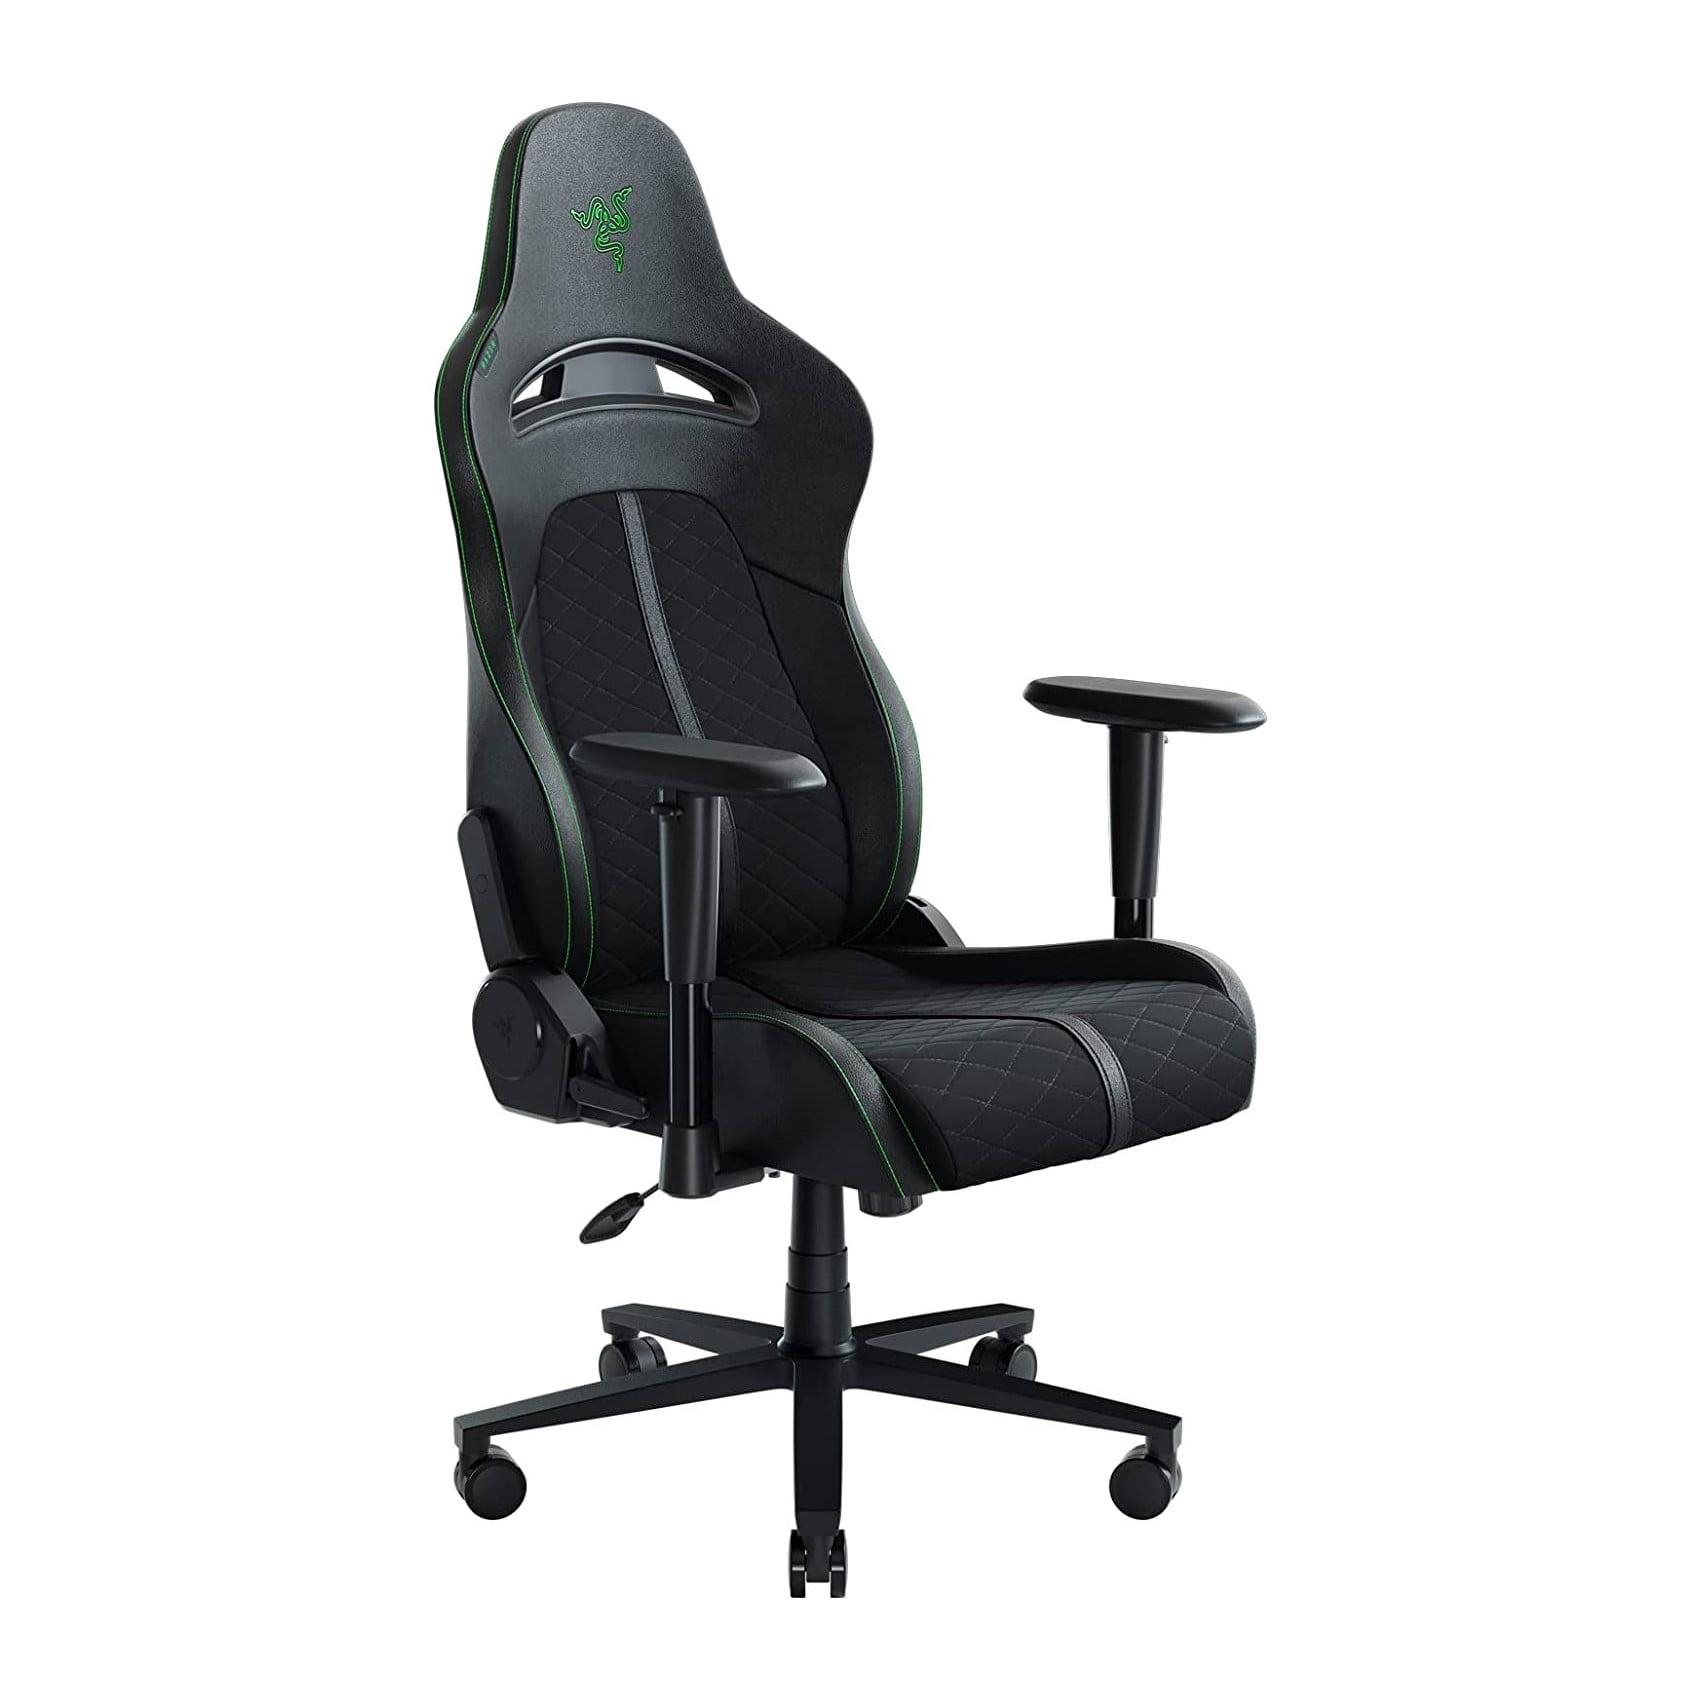 Razer Enki X Essential Gaming Chair for Gaming Performance Price in Pakistan ZahComputers